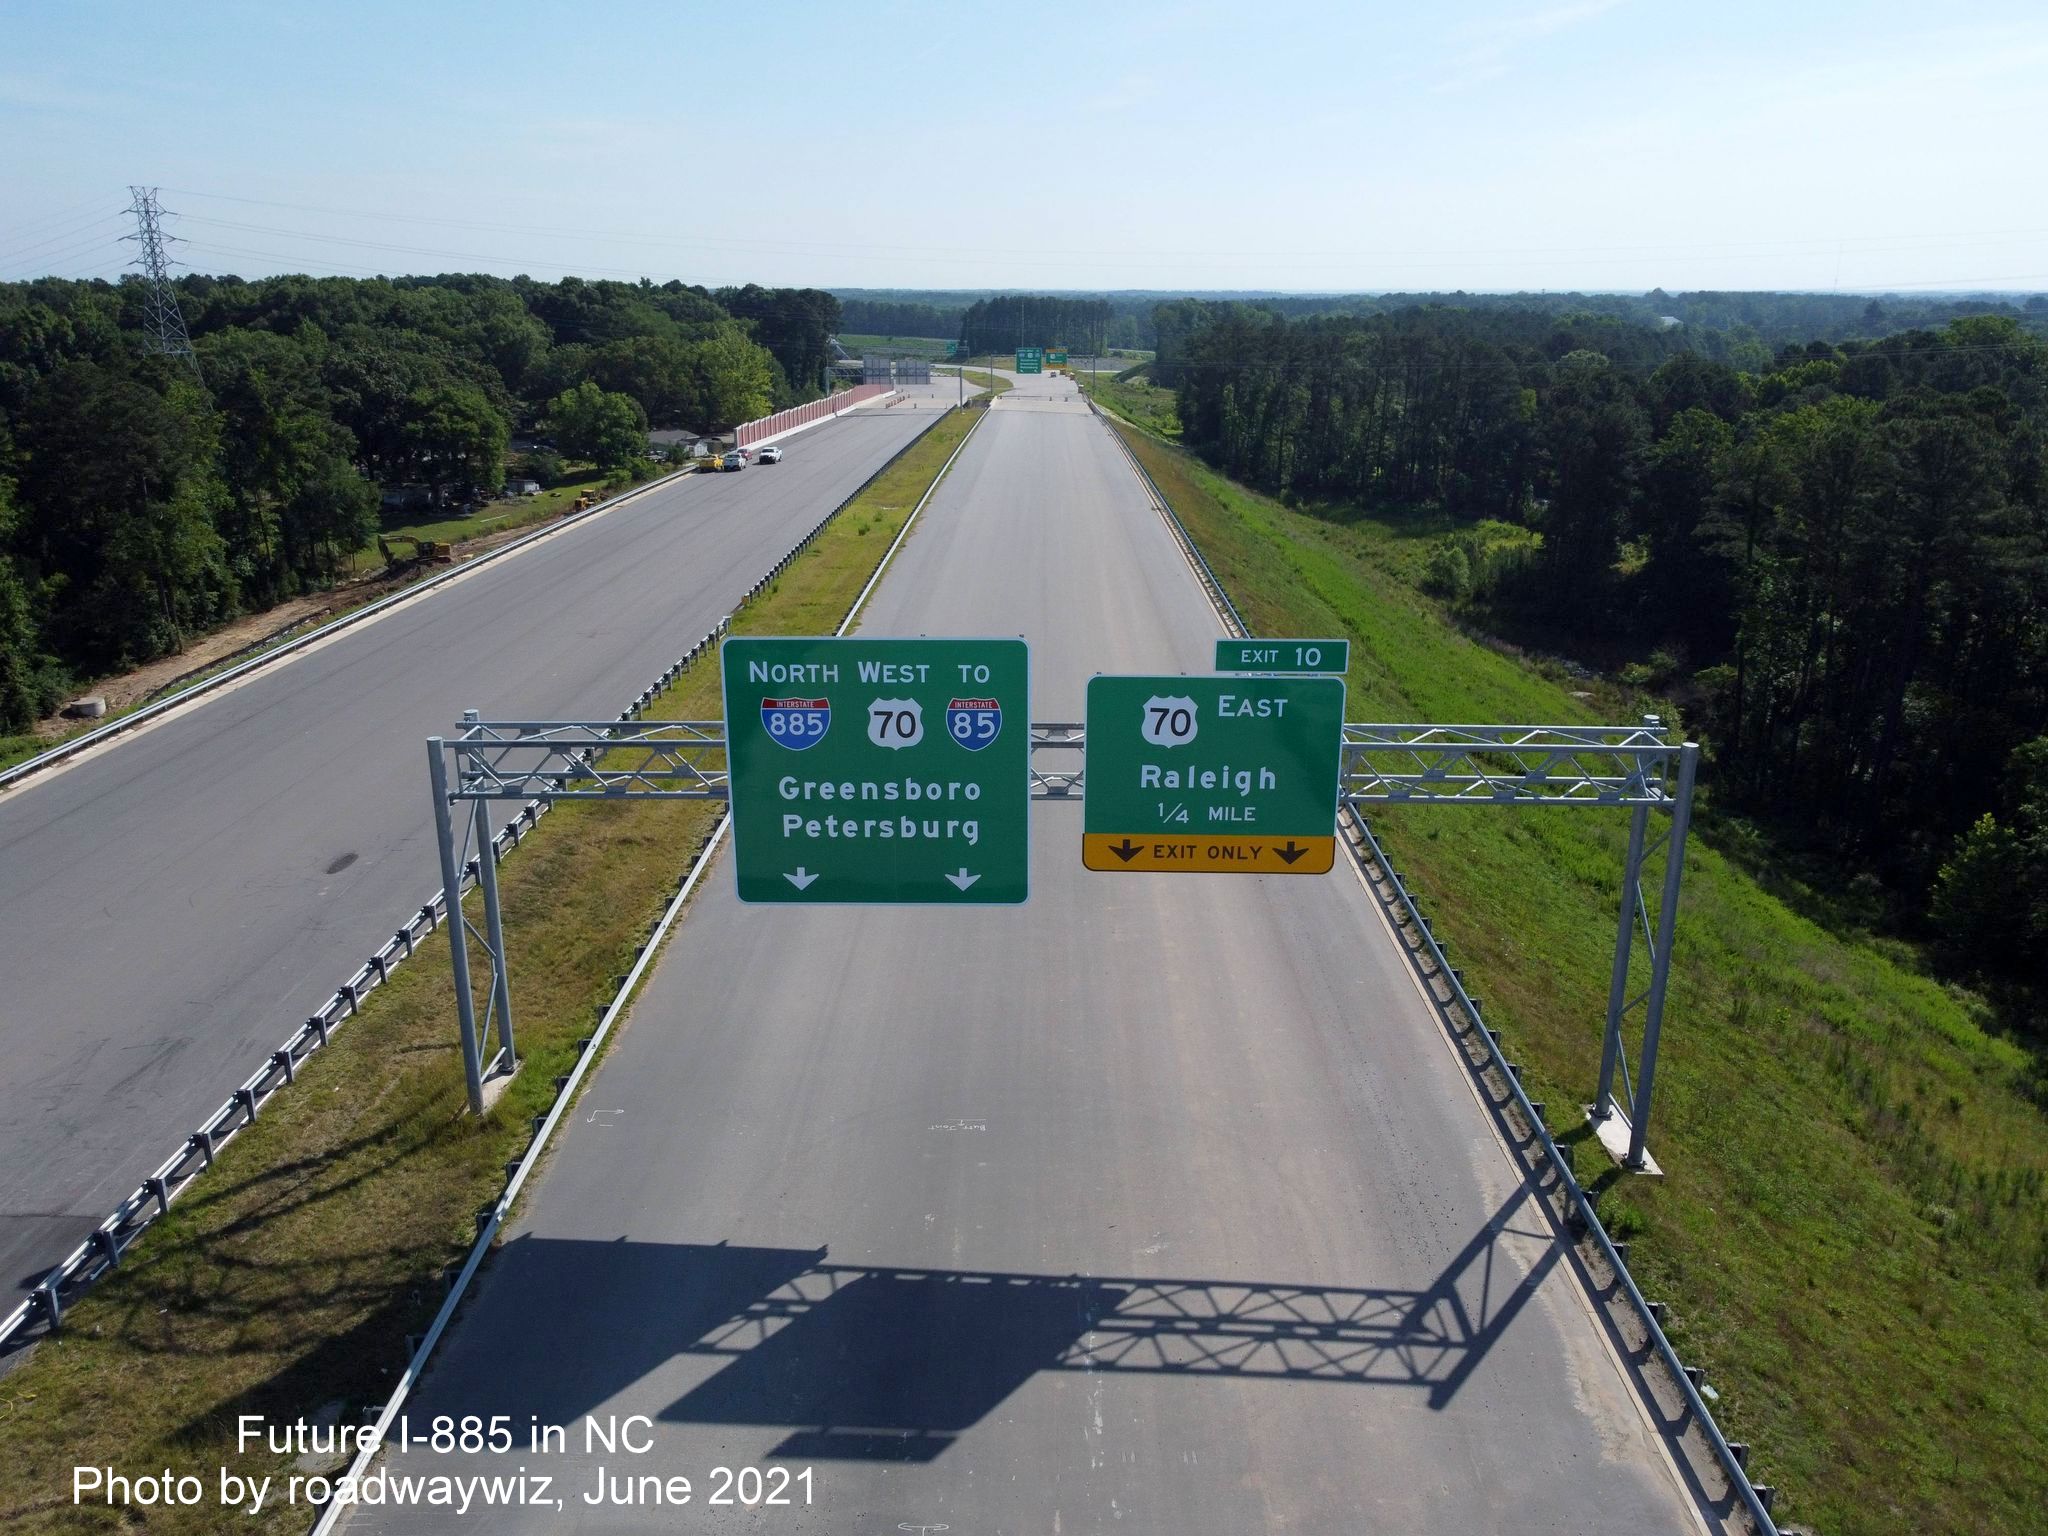 Image of 1/4 mile advance and pull through signs on unopened I-885 North for US 70 exit, photo by roadwaywiz, June 2021